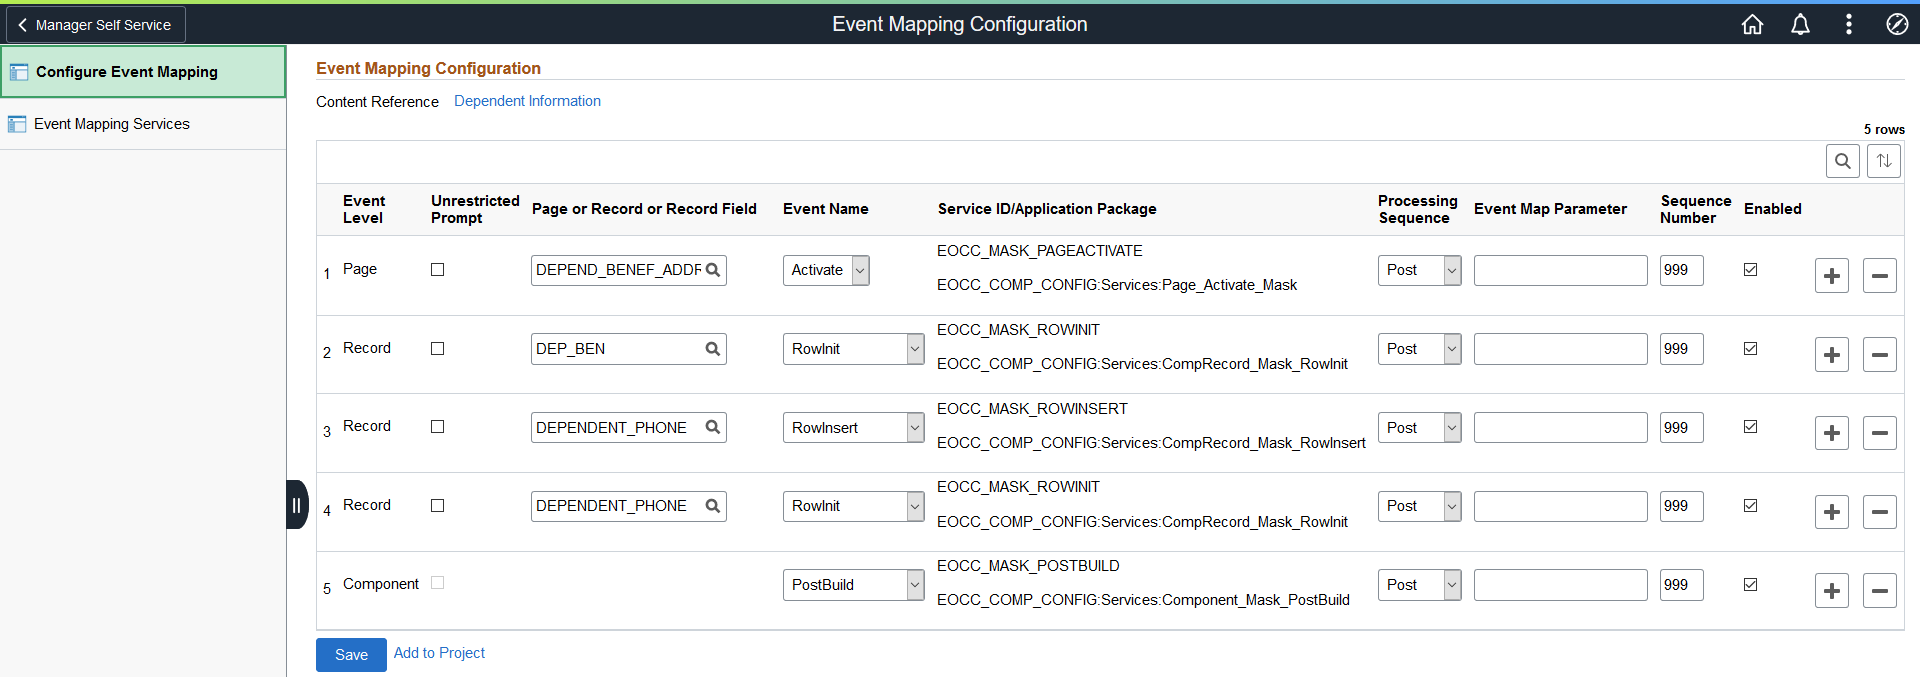 Event Mapping Configuration page